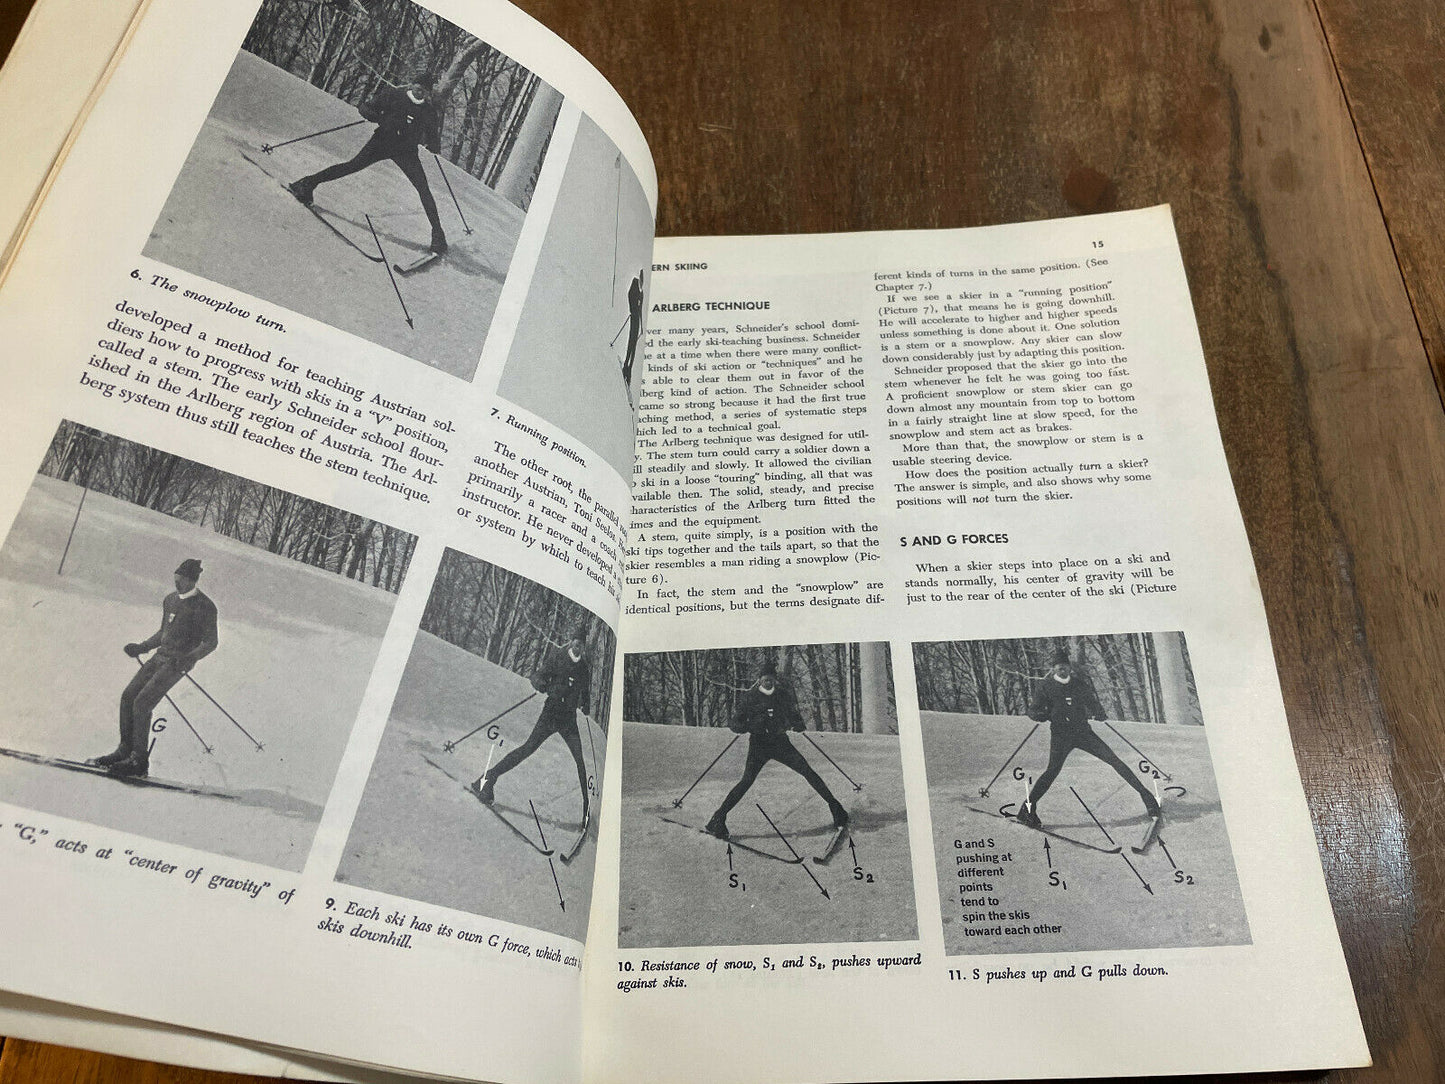 The Skier's Bible by Morten Lund, Revised Edition 1972 (4A)